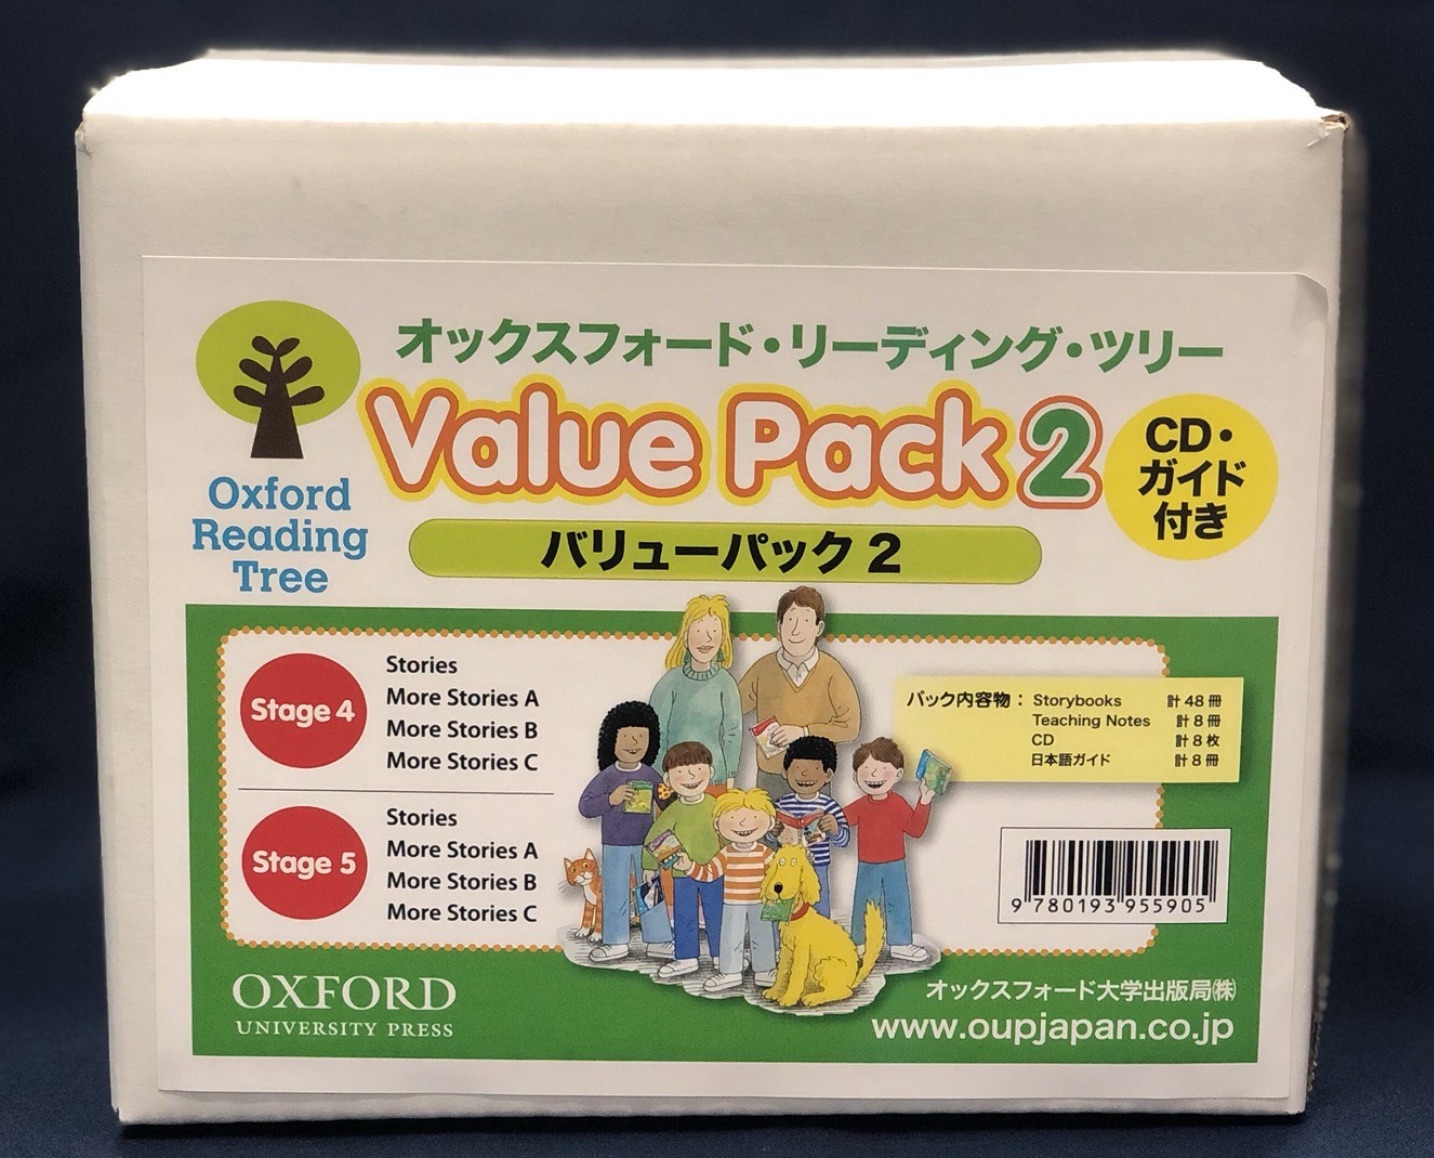 Oxford Reading Tree: Special Packs - Value Pack 2 (all CD packs 